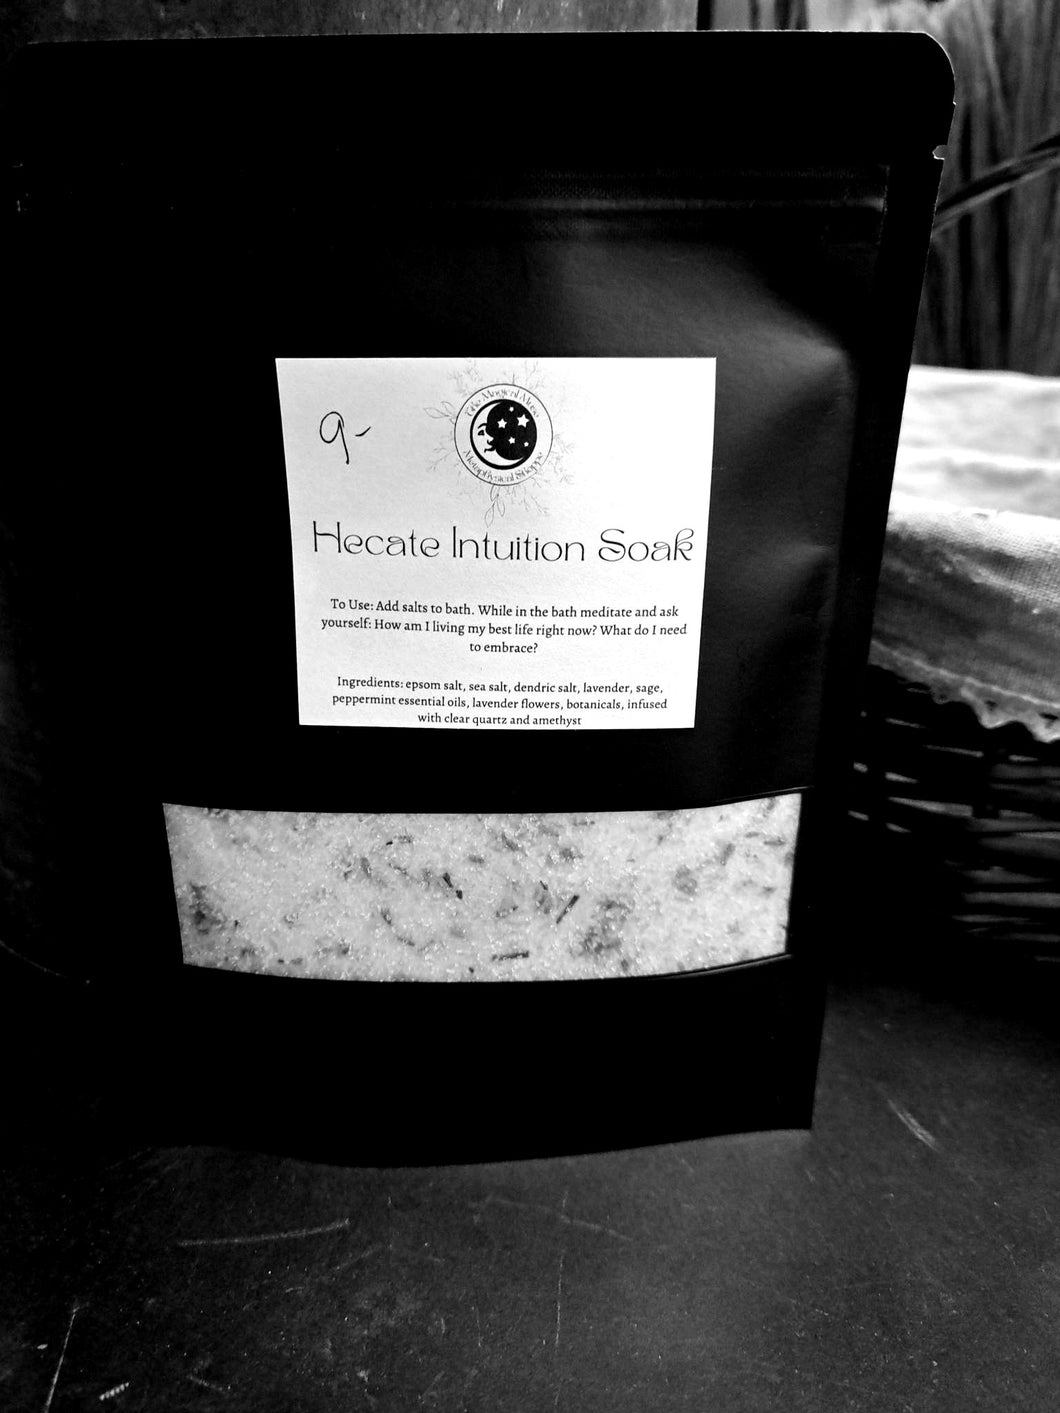 Hecate Intuition Soak